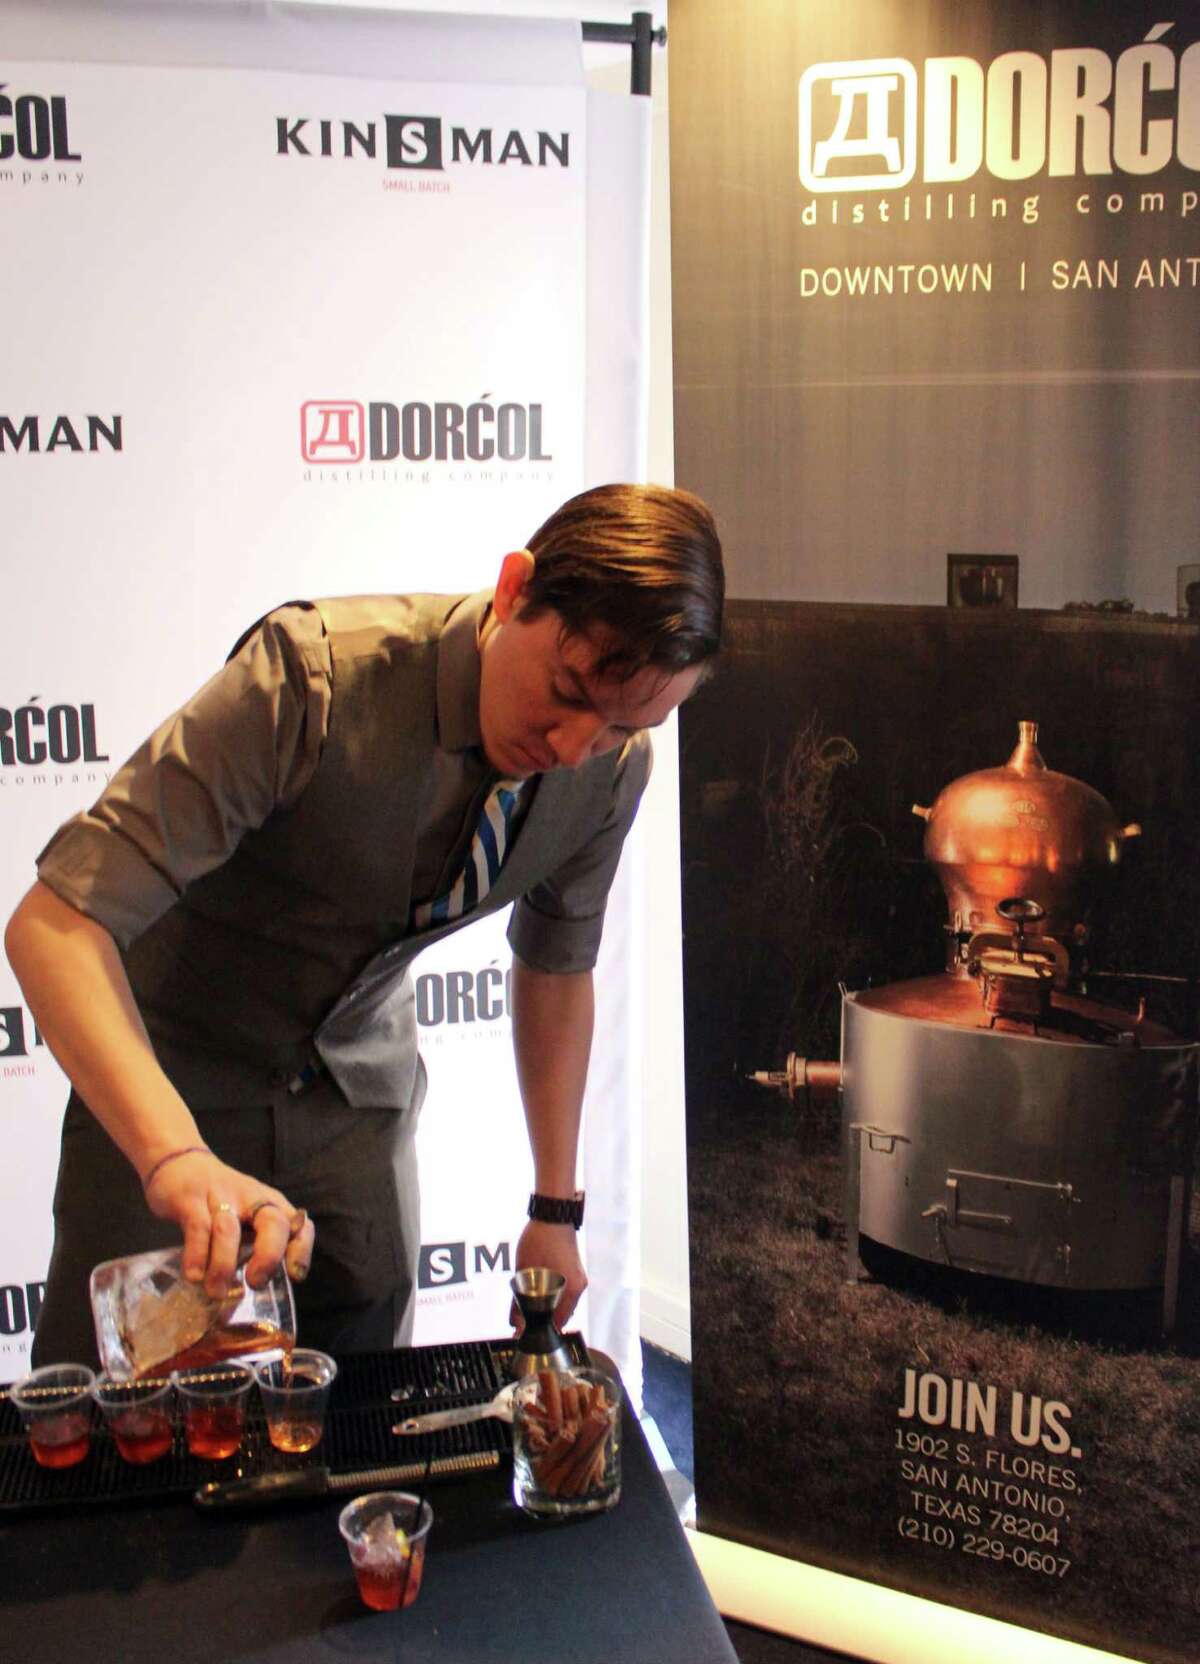 A bartender for Dorcol Distilling Co. makes drinks during the San Antonio Cocktail Conference.